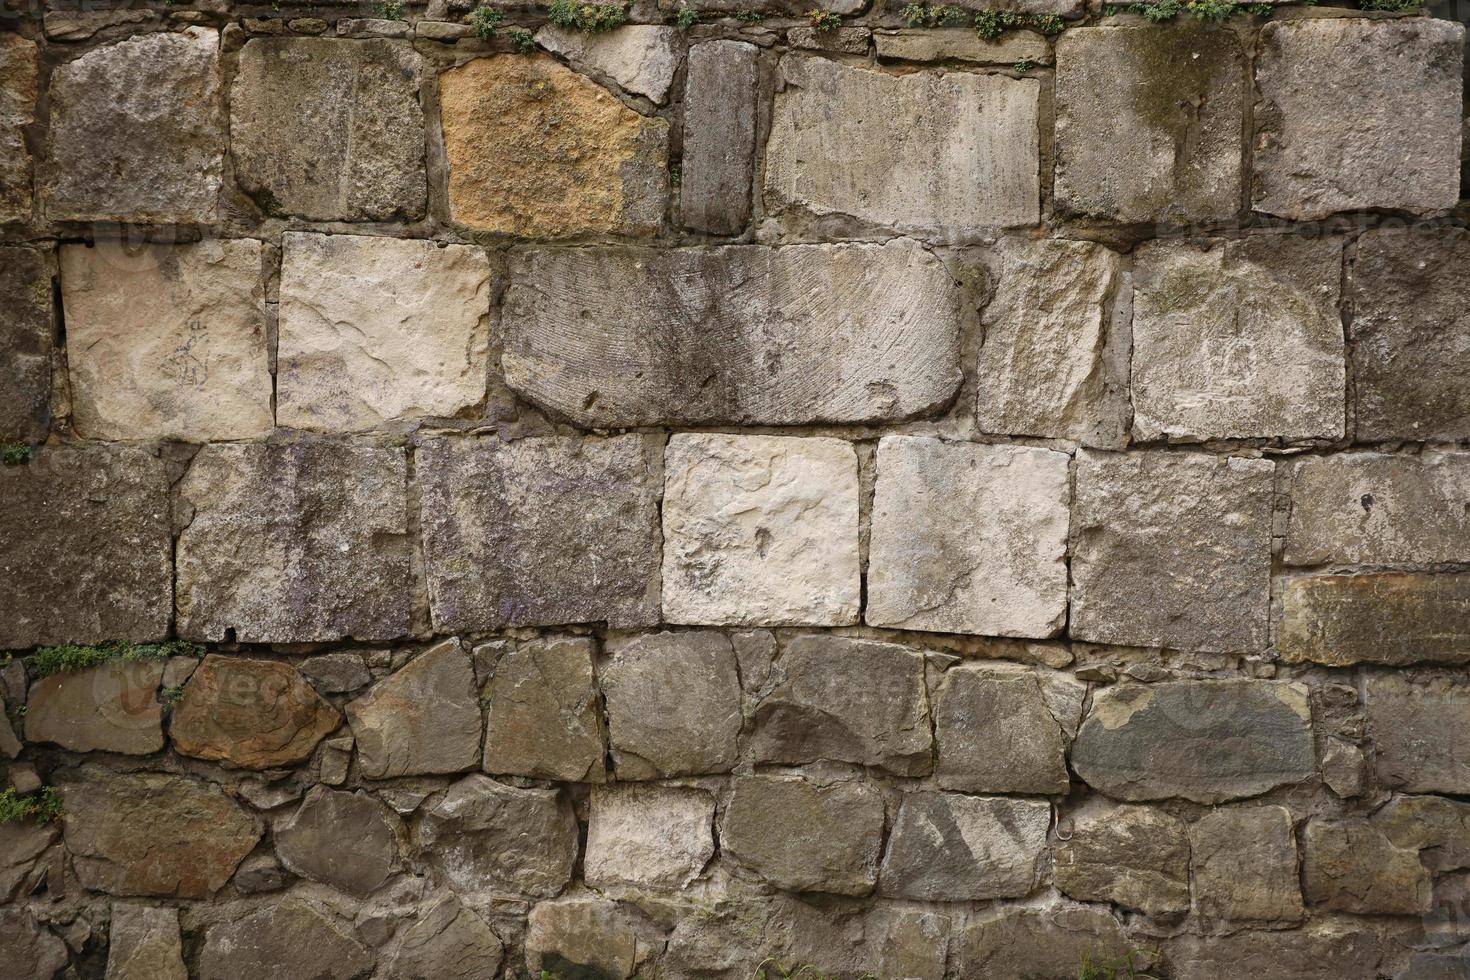 Texture of stone wall with many big brown stones photo